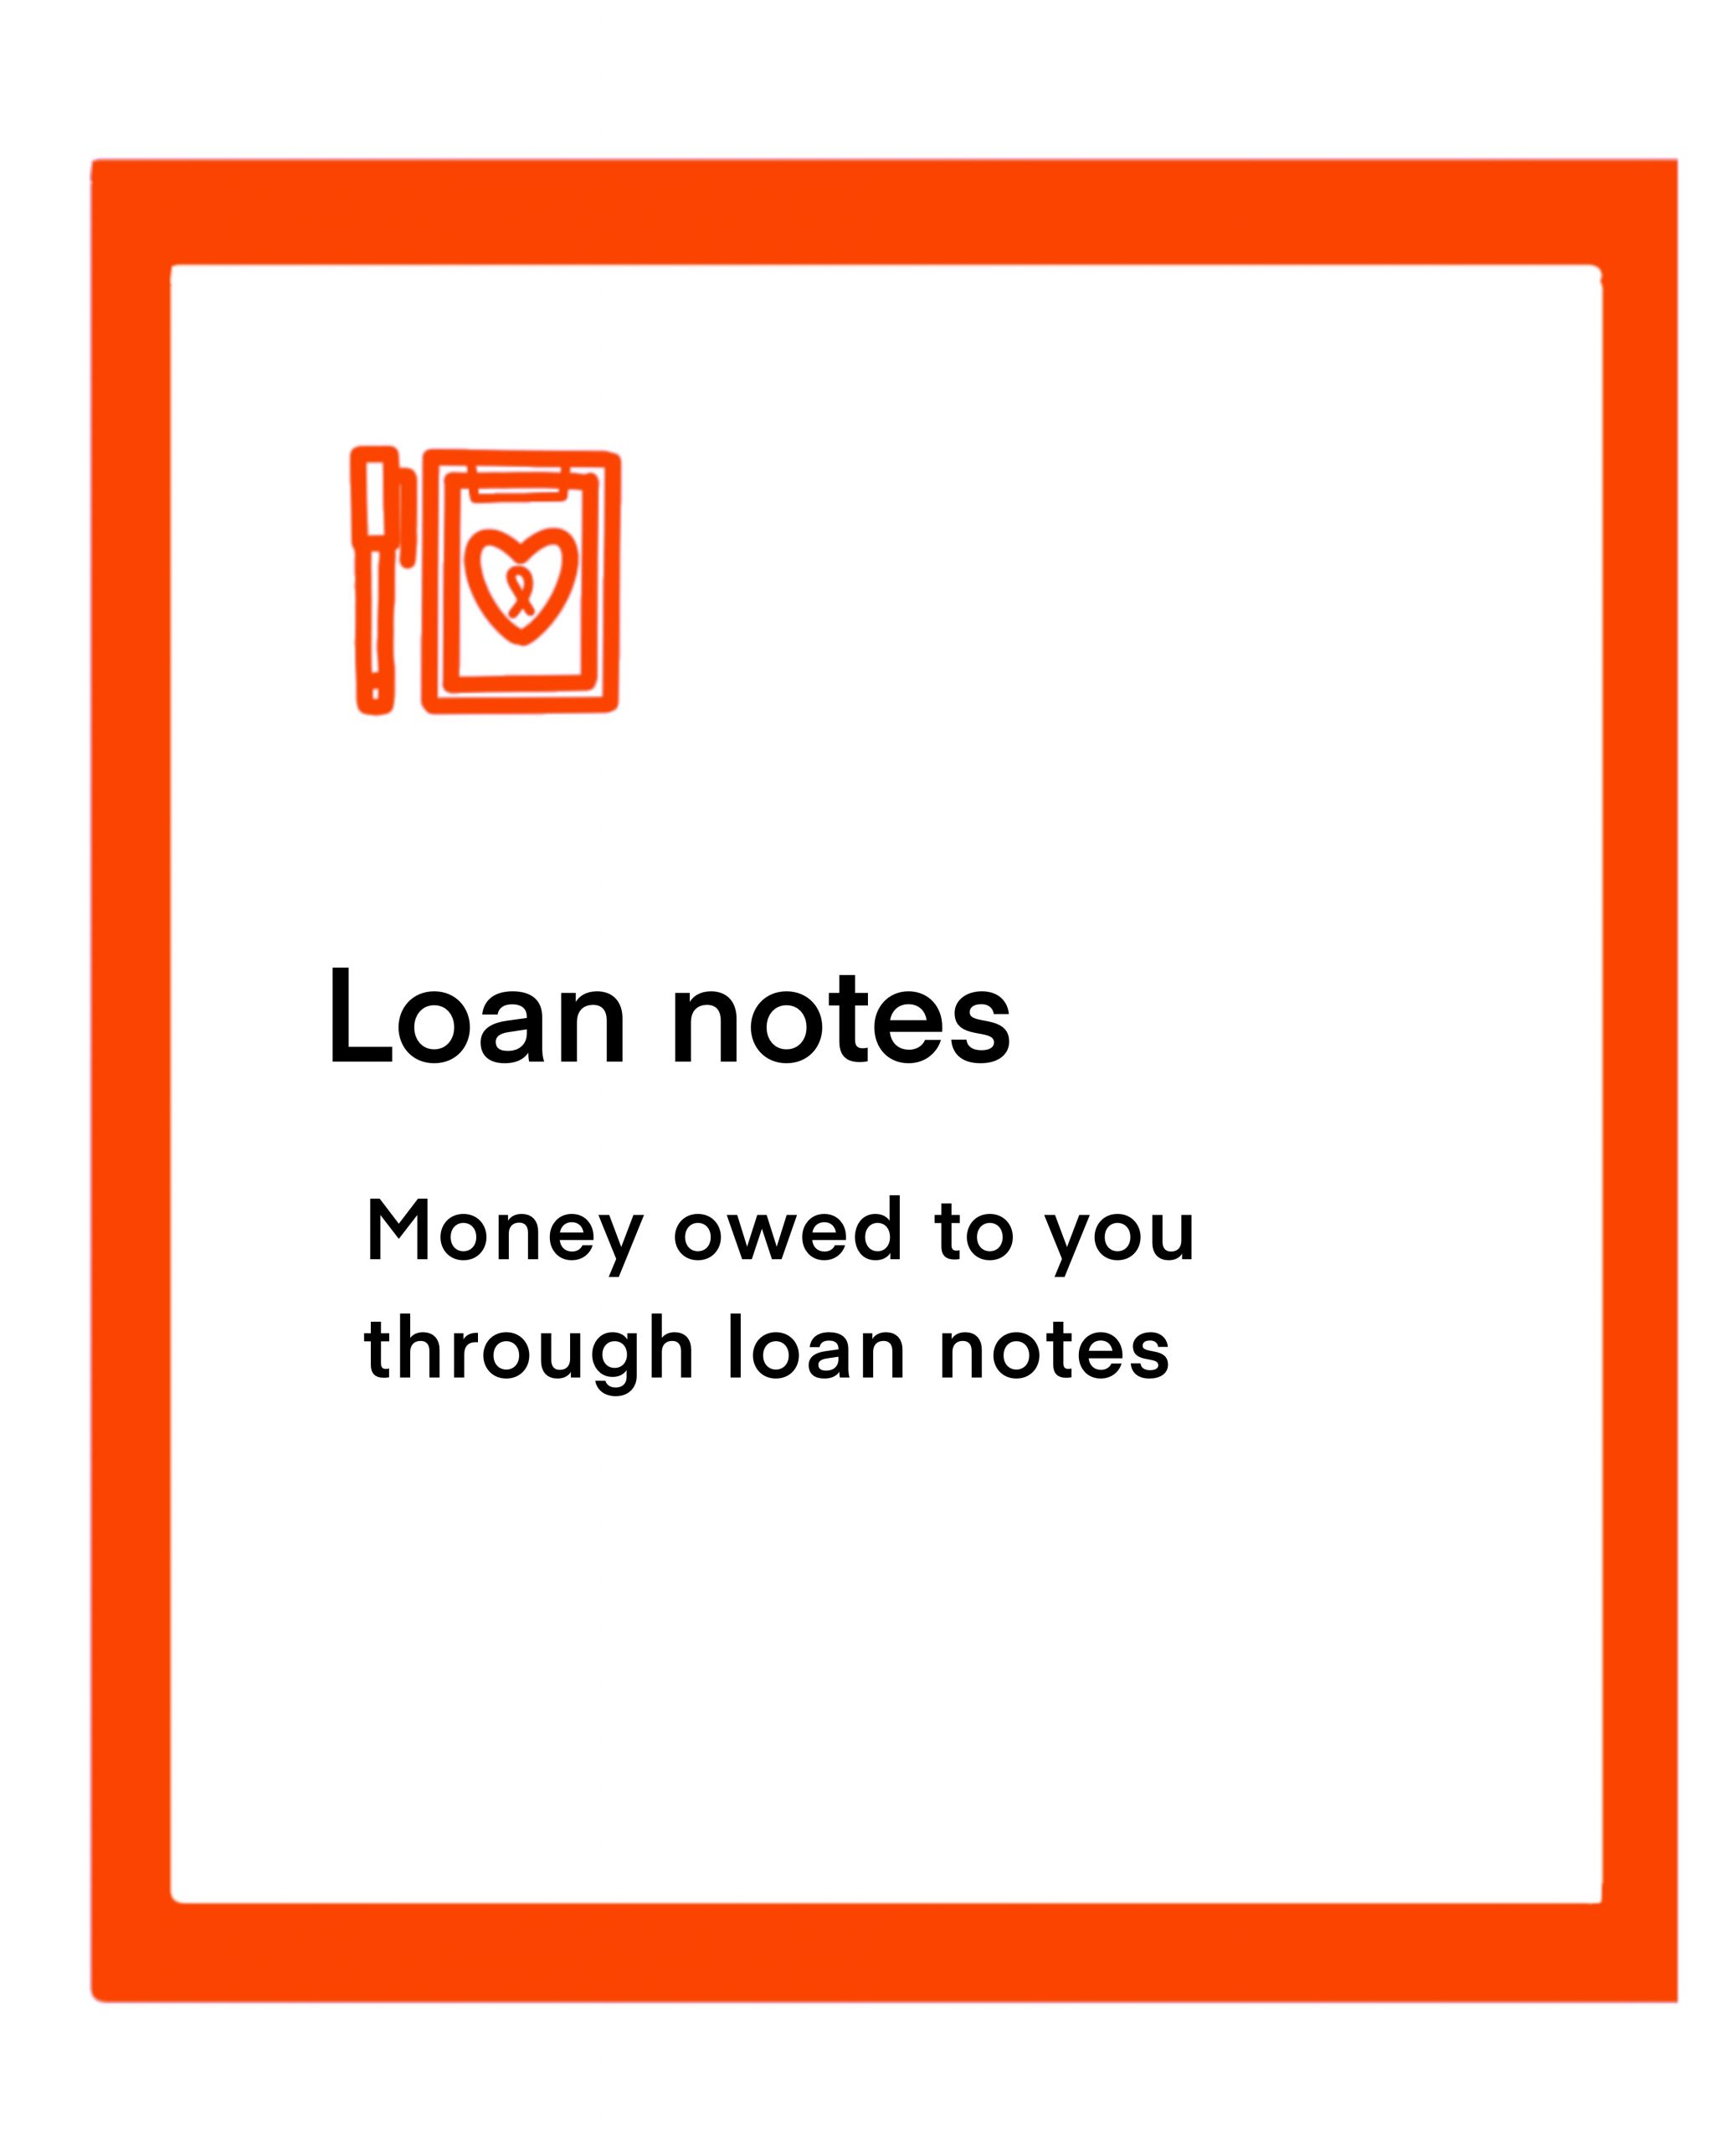 Loan notes